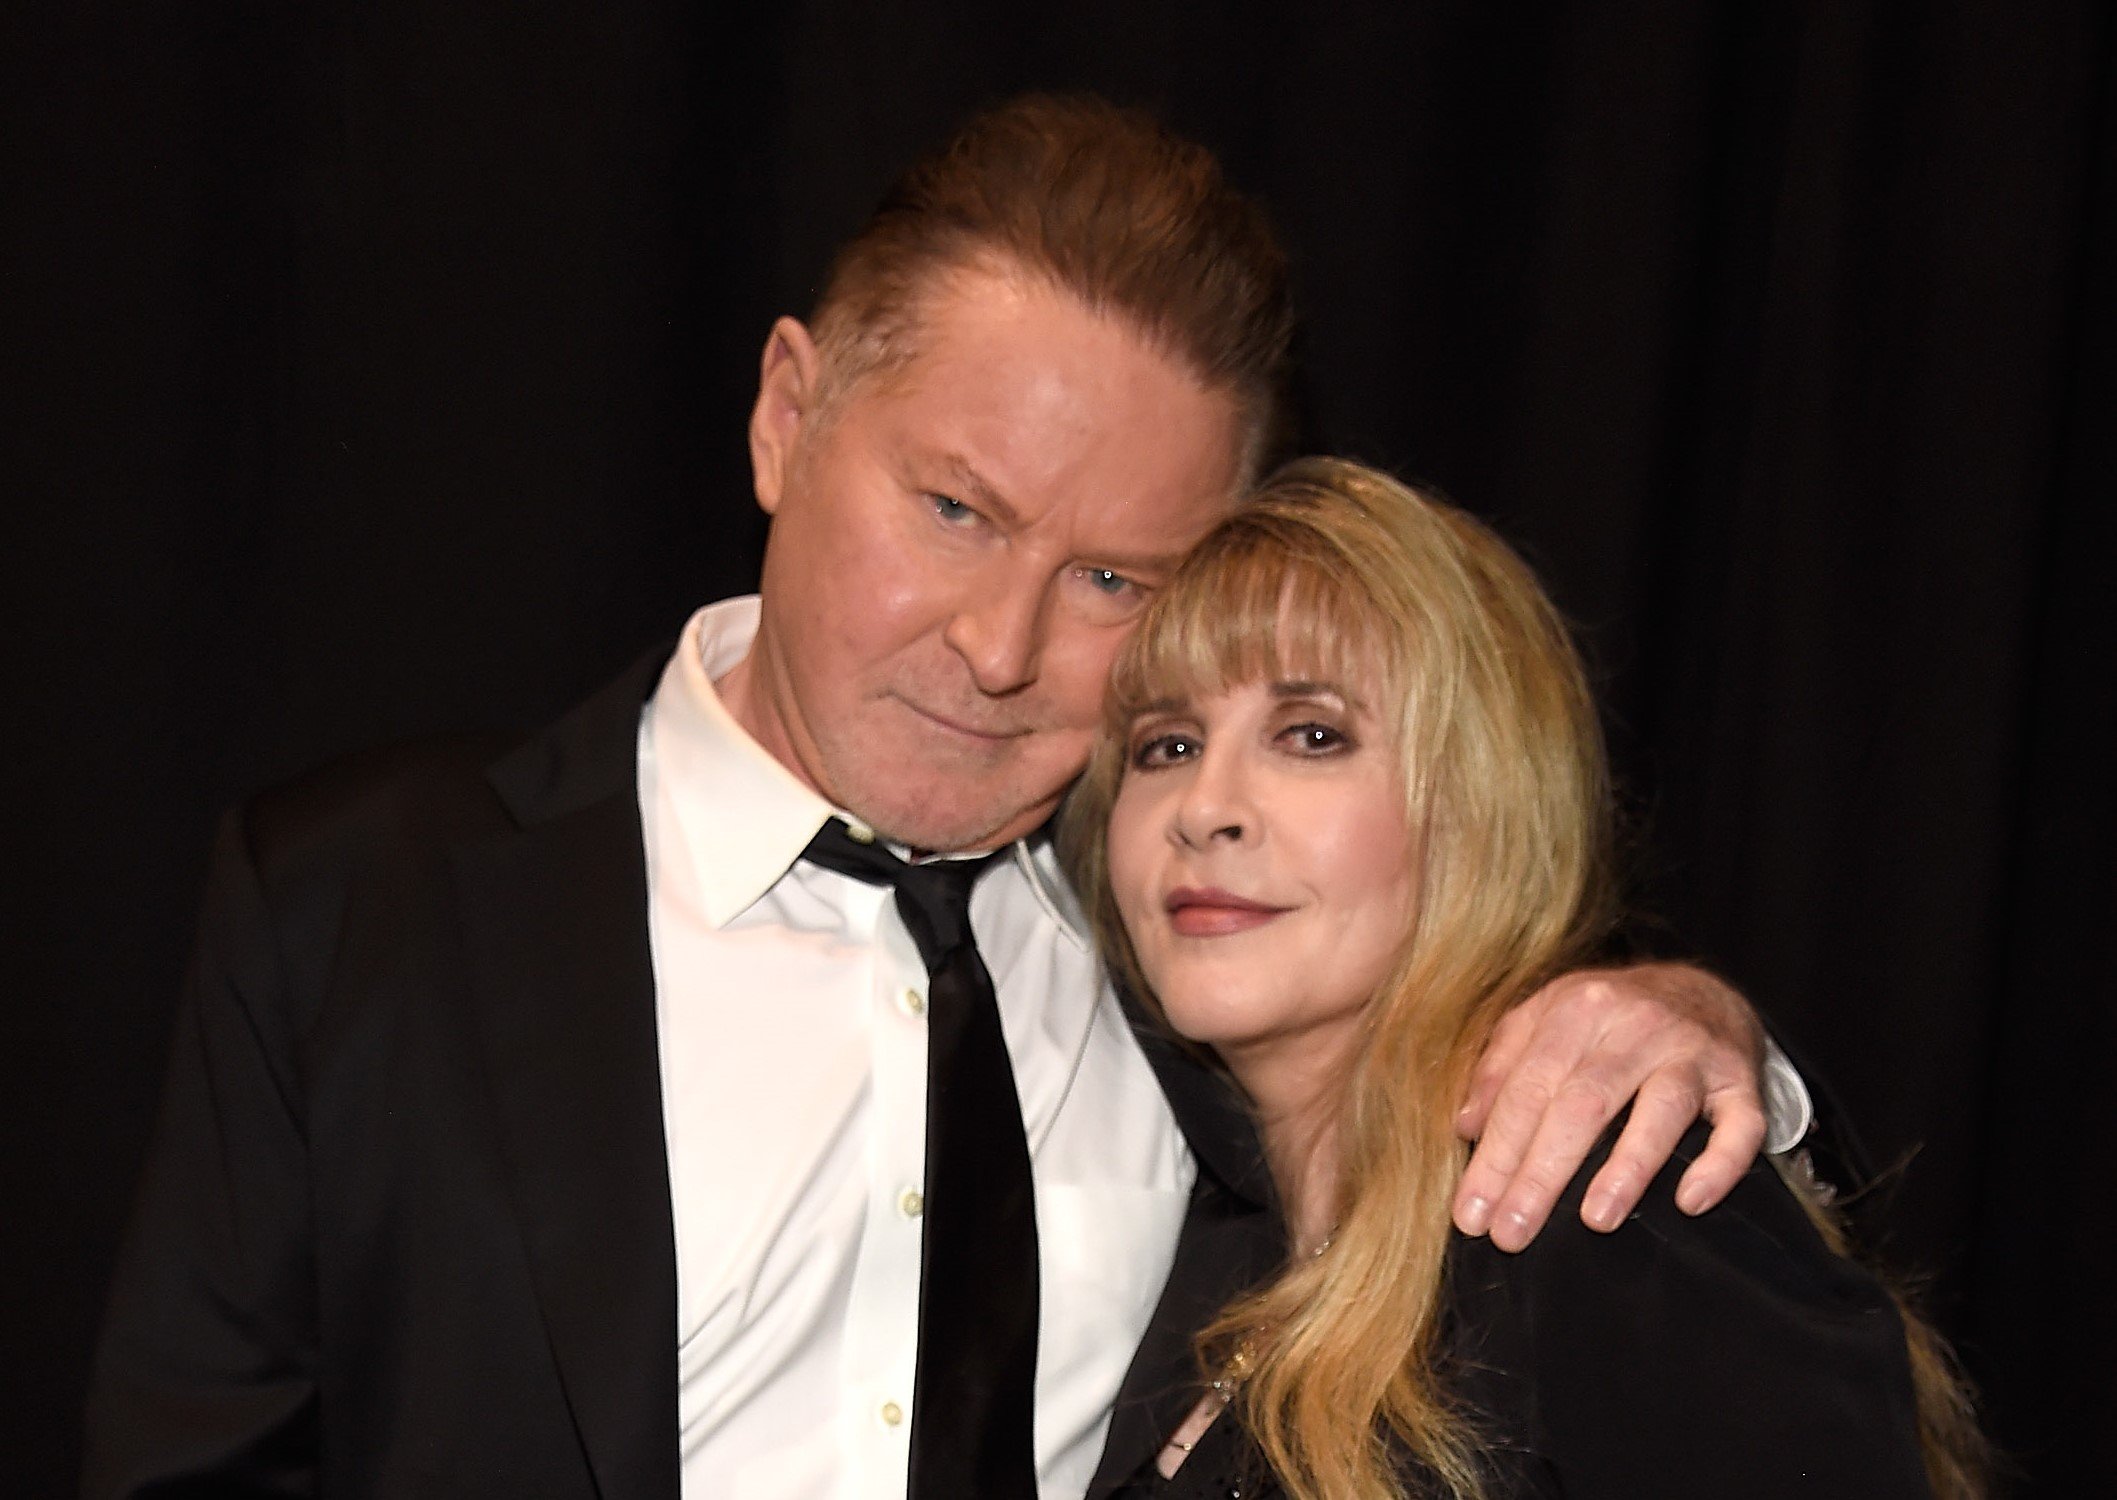 Stevie Nicks Said Don Henley’s Romantic Gestures ‘Freaked Out’ Her